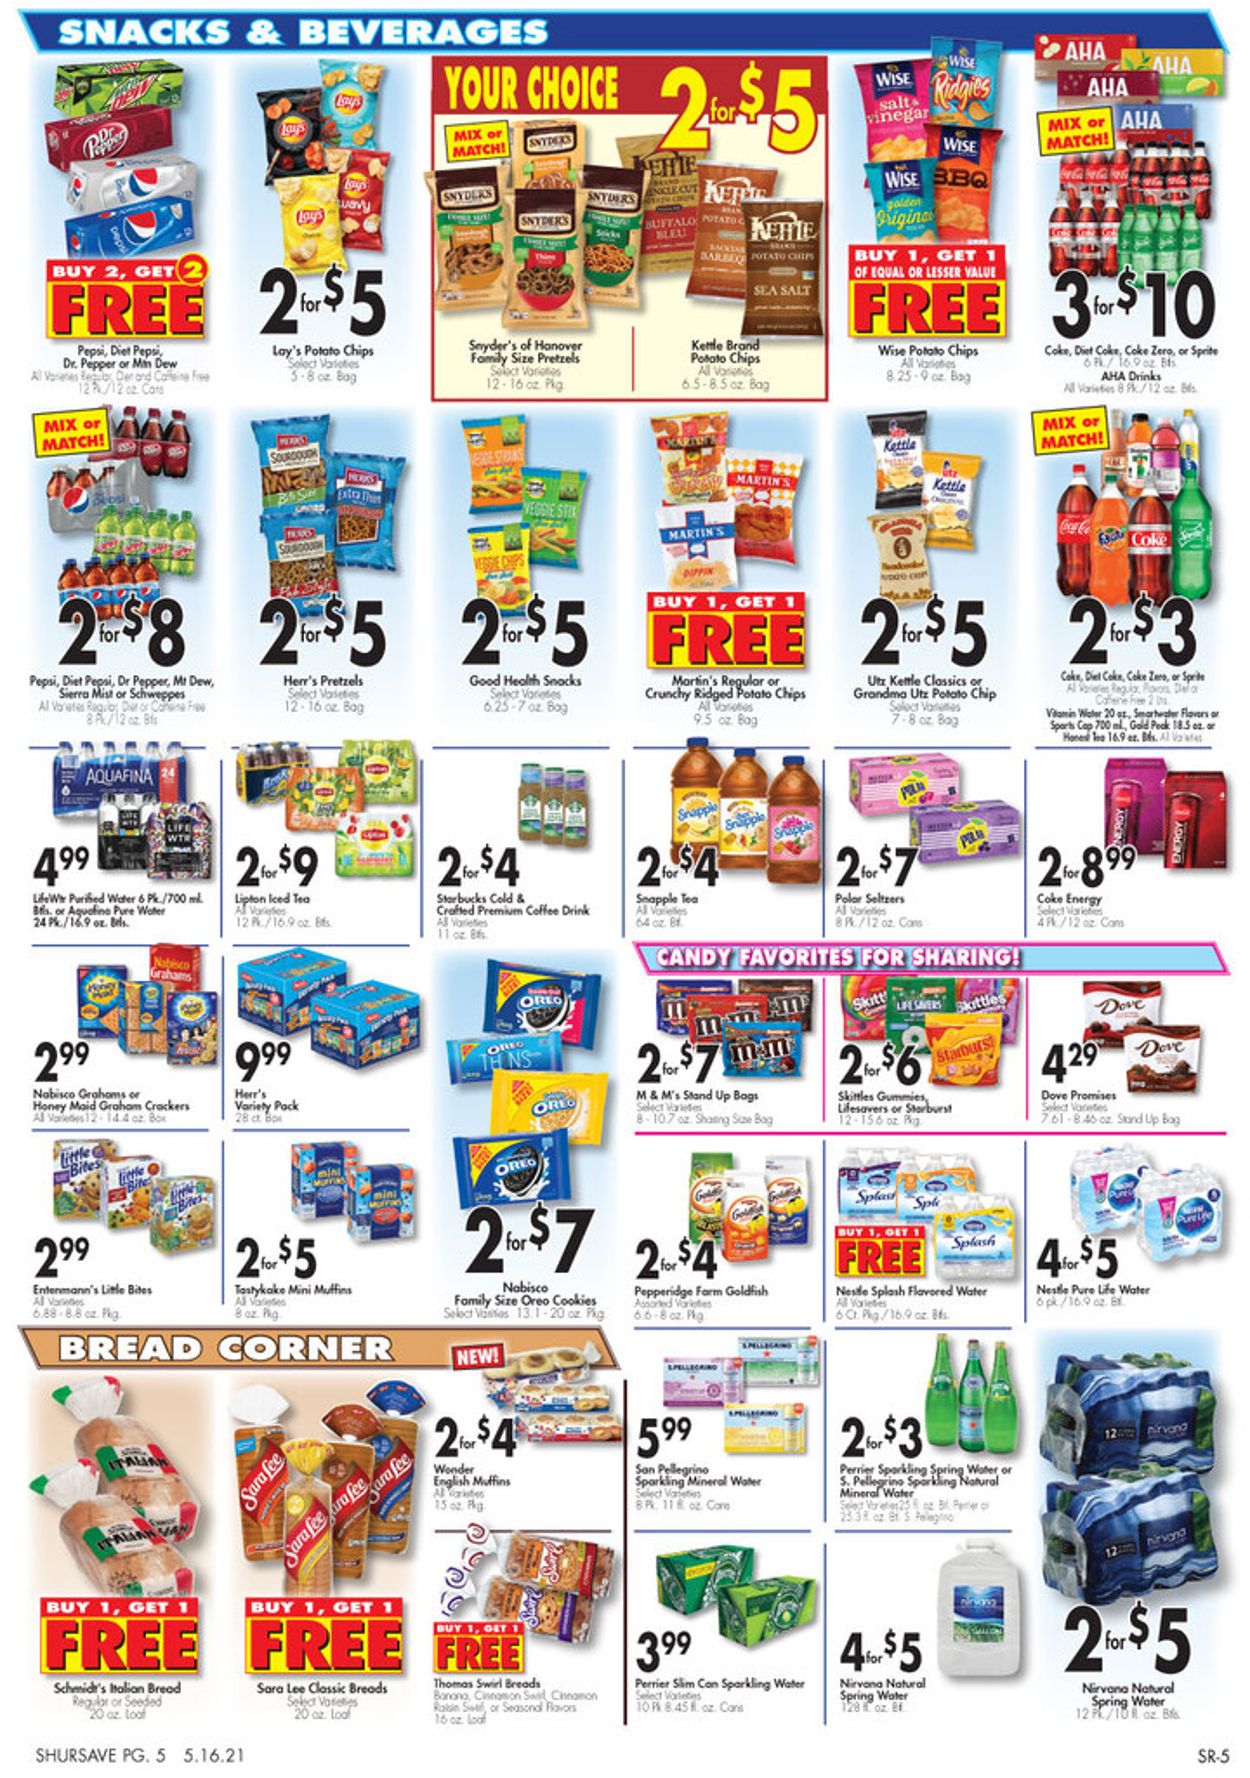 Catalogue Gerrity's Supermarkets from 05/16/2021